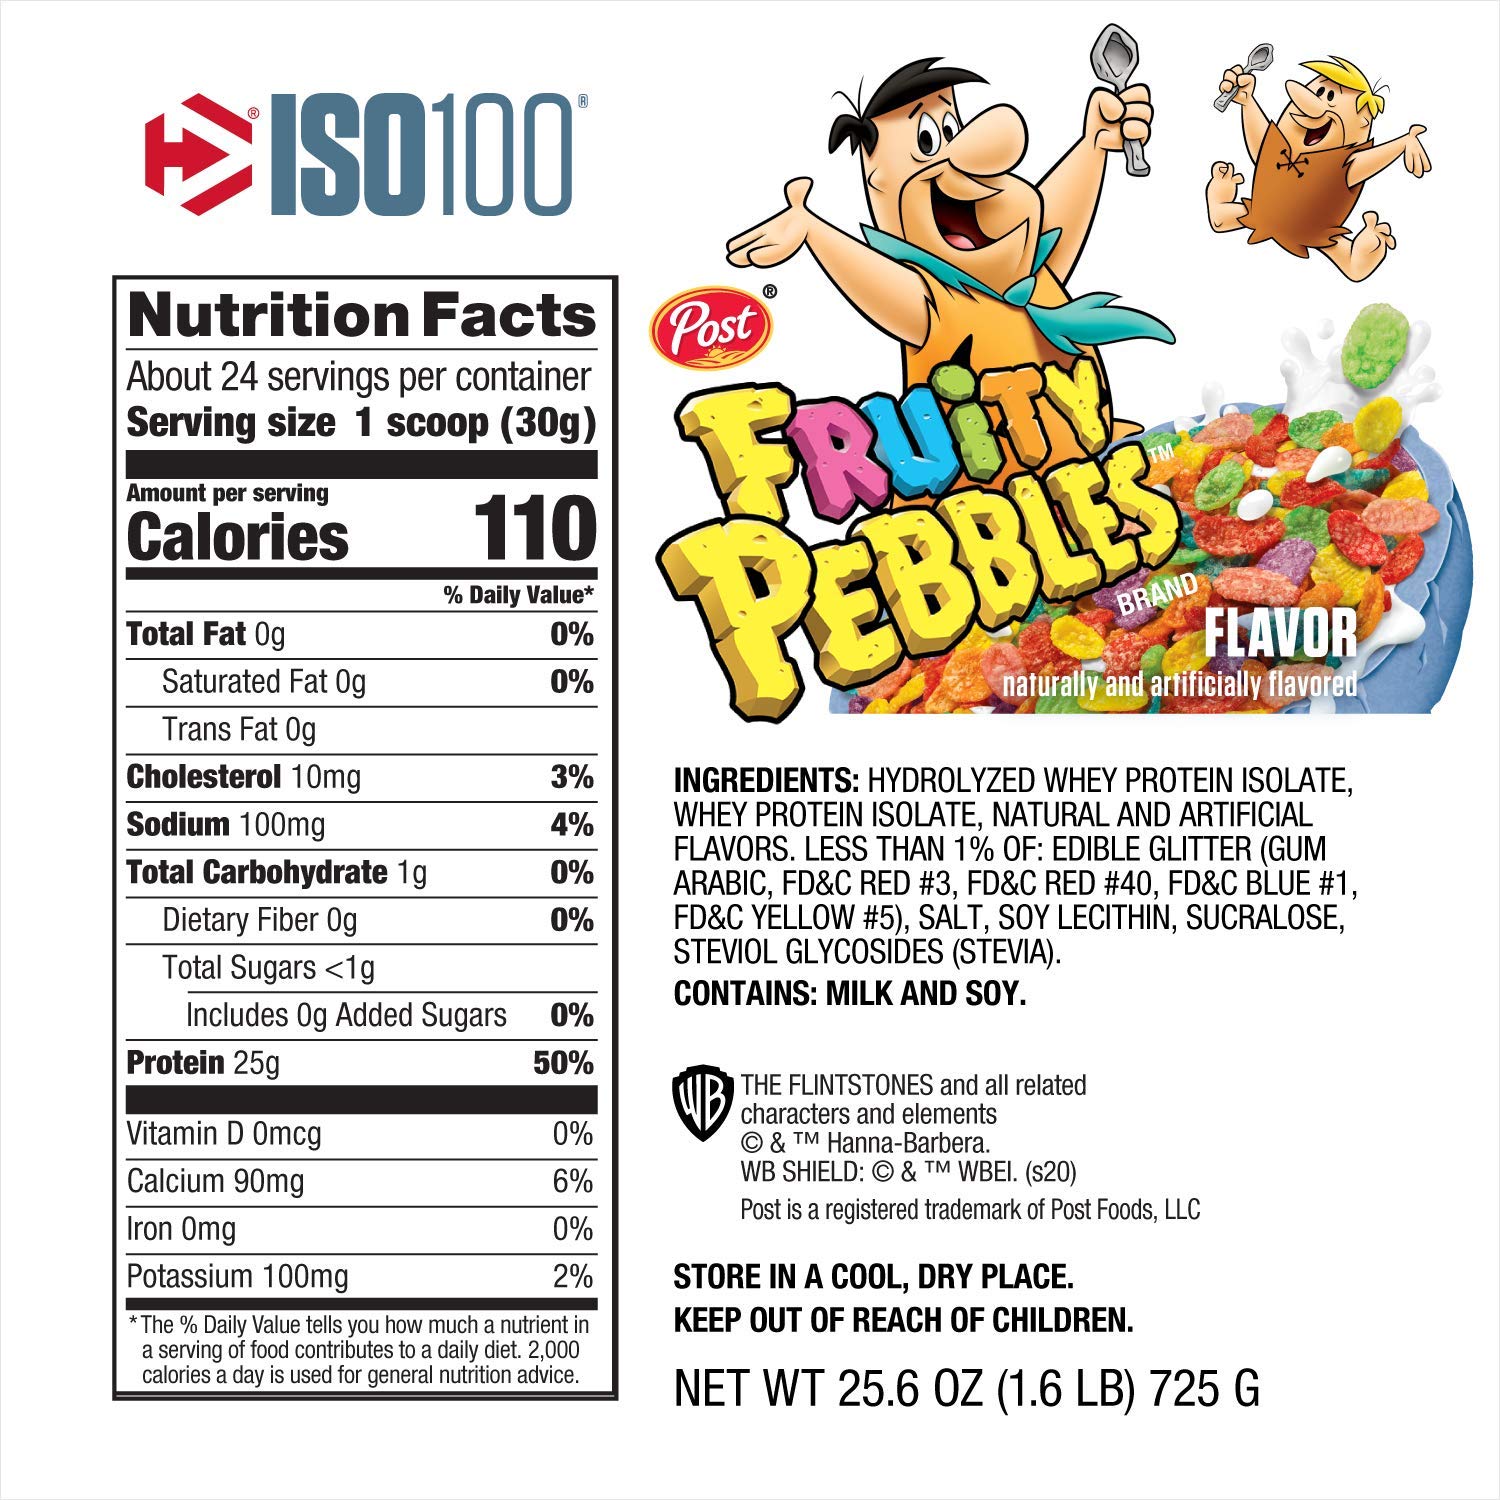 Dymatize ISO100 Hydrolyzed 100 Whey Protein Isolate Fruity Pebbles (1.6 Lbs. / 24 Servings)